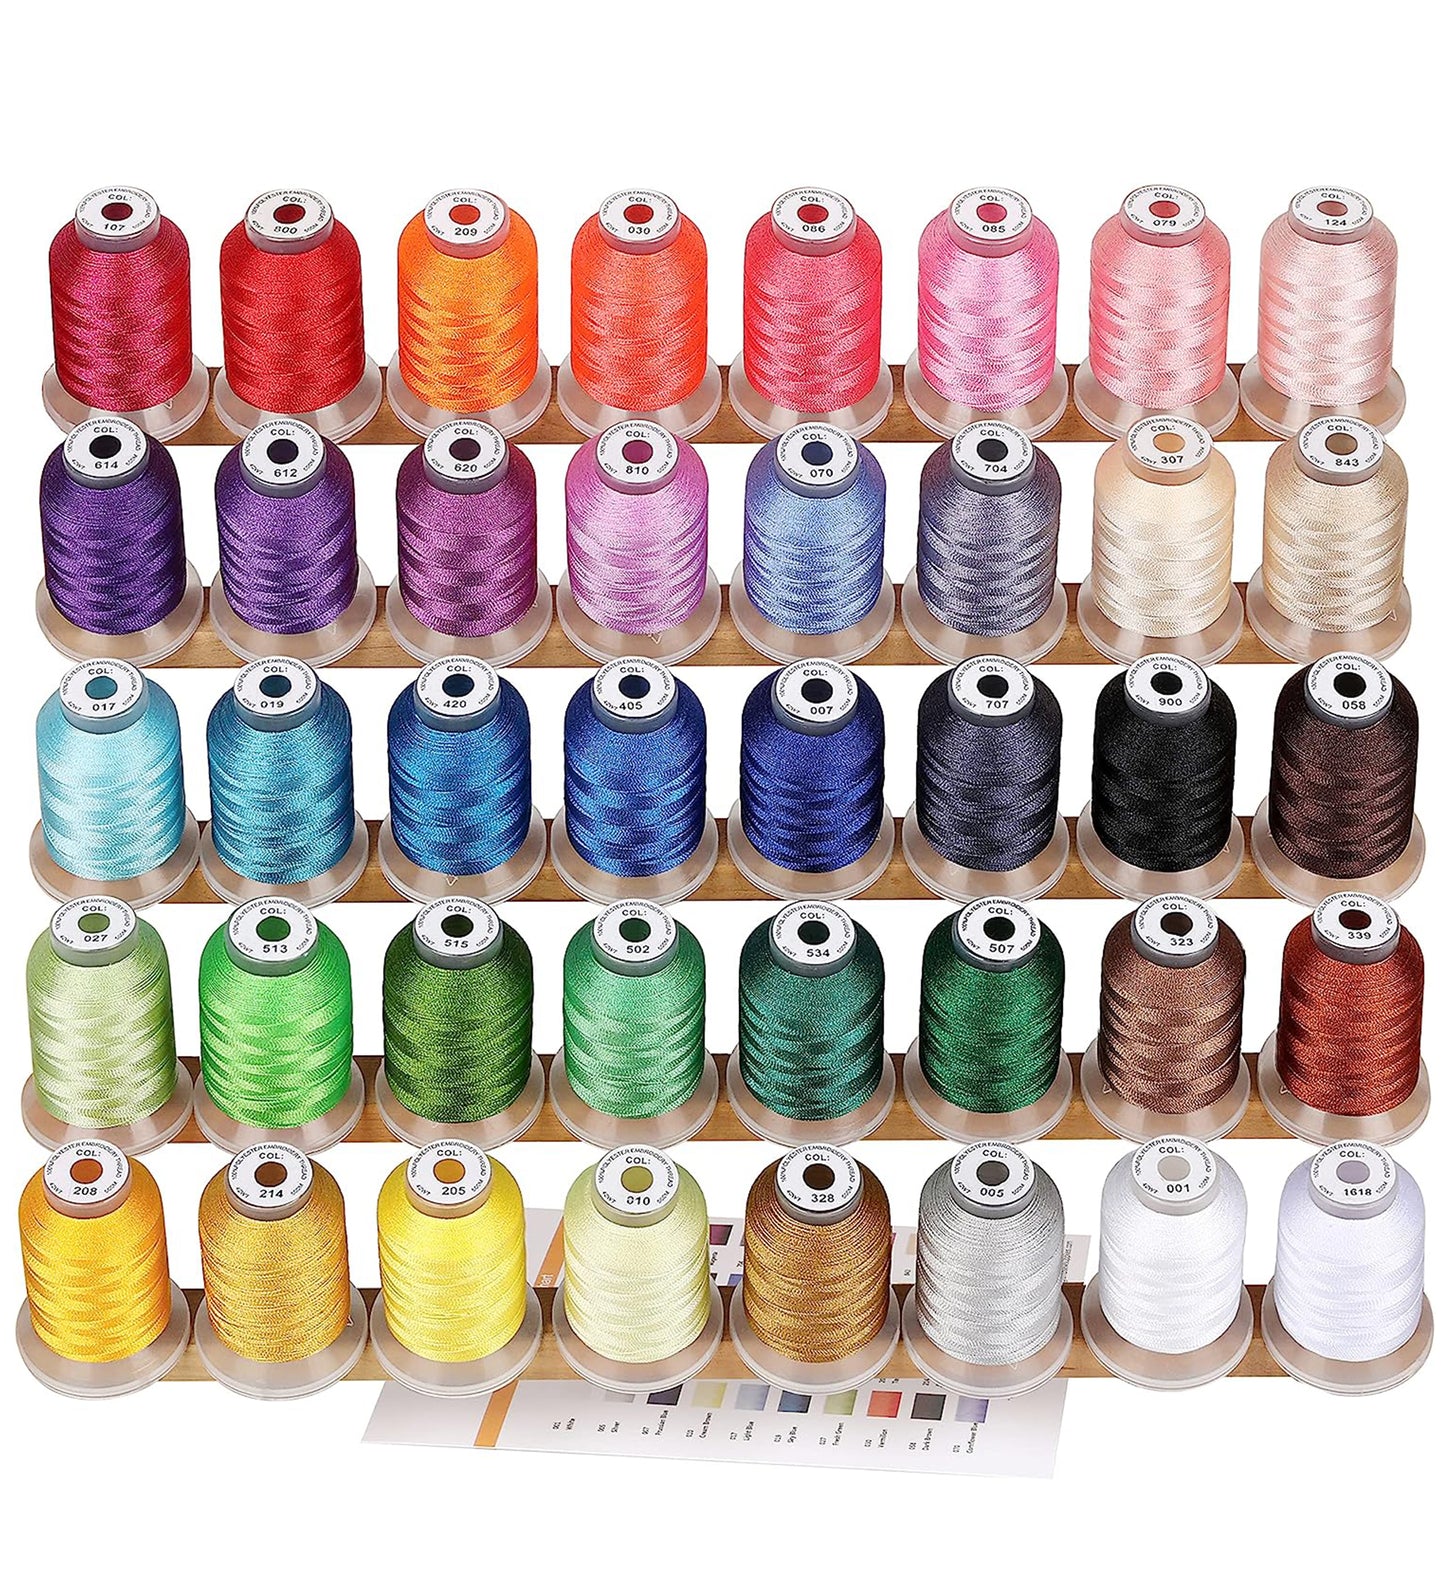 New brothread 40 Brother Colors Polyester Embroidery Machine Thread Kit 500M (550Y) Each Spool